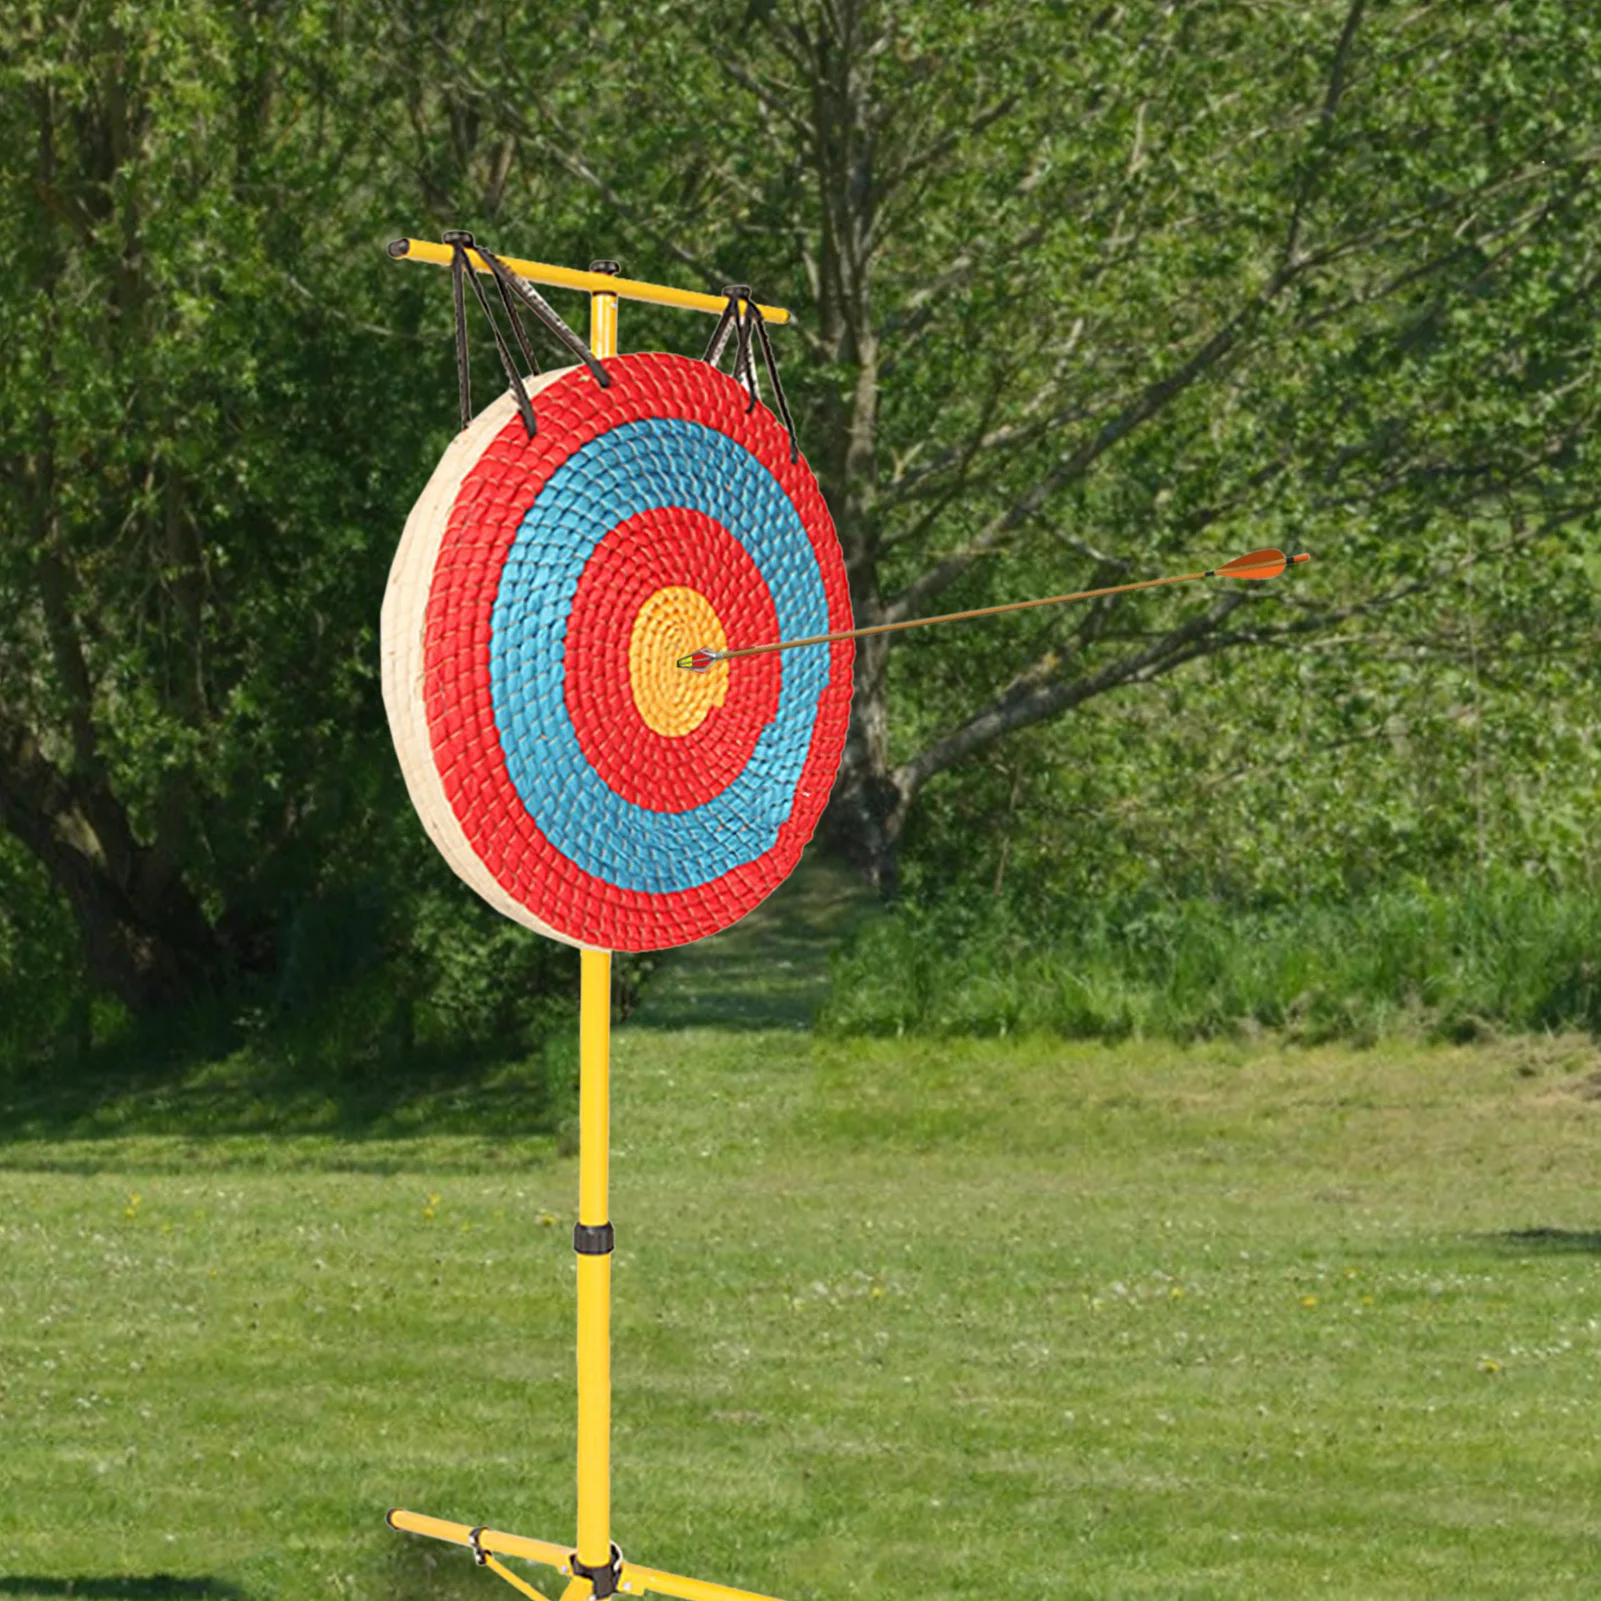 Straw Shooting Target Grass Target Archery Straw Target Bow Arrows Shooting Aiming Practice Target For Outdoor Sports Shooting